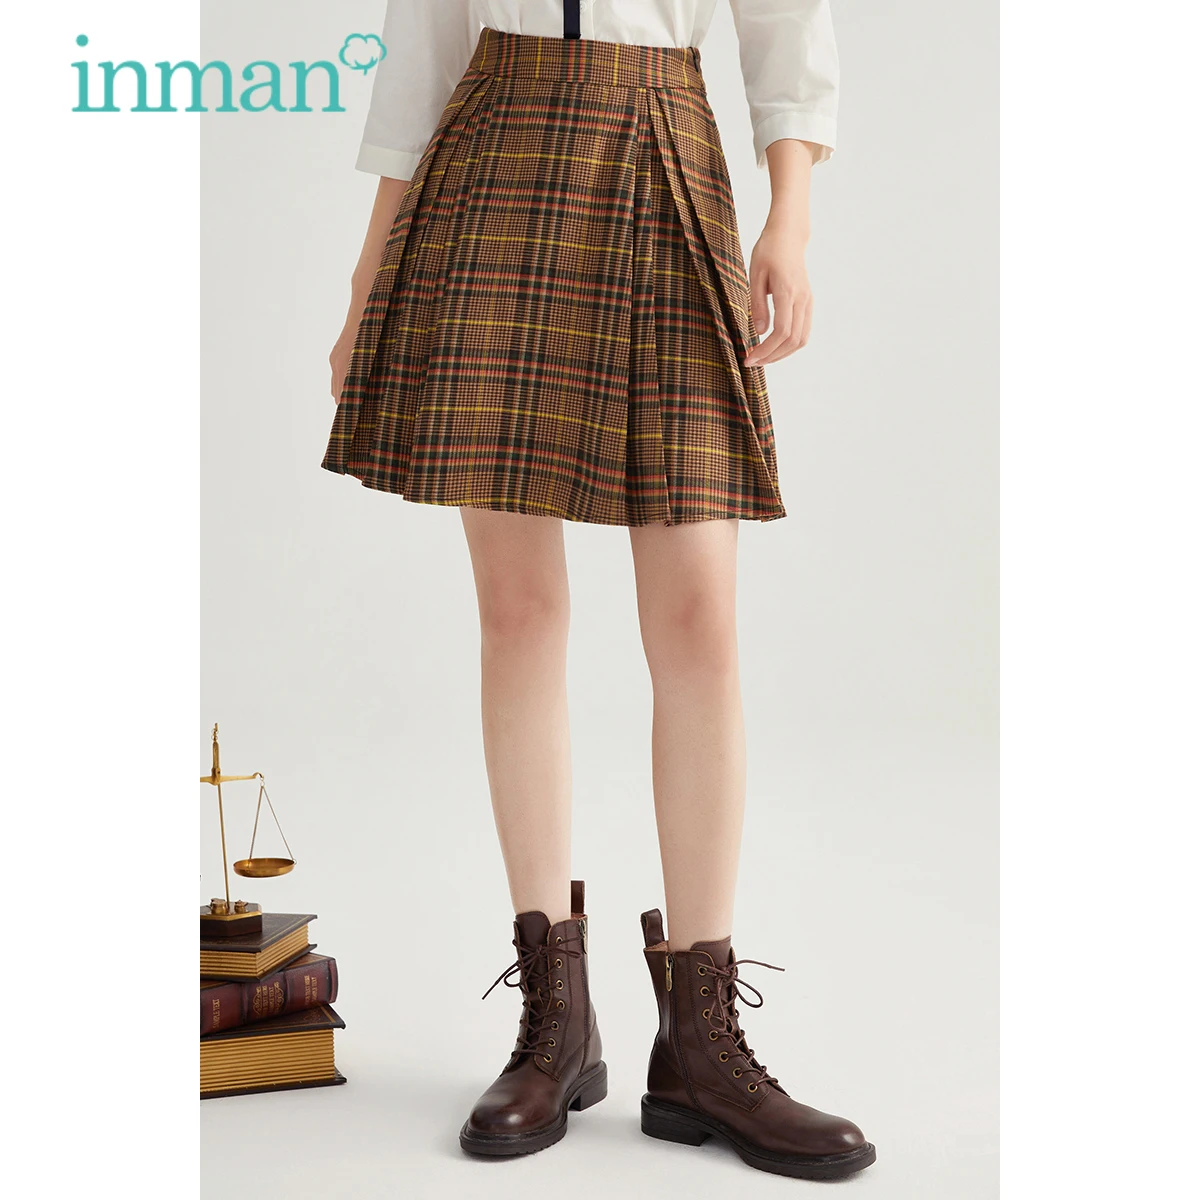 

INMAN Women's Skirt Spring Autumn Vintage Literary Pleated All-match A-line Female Bottoms